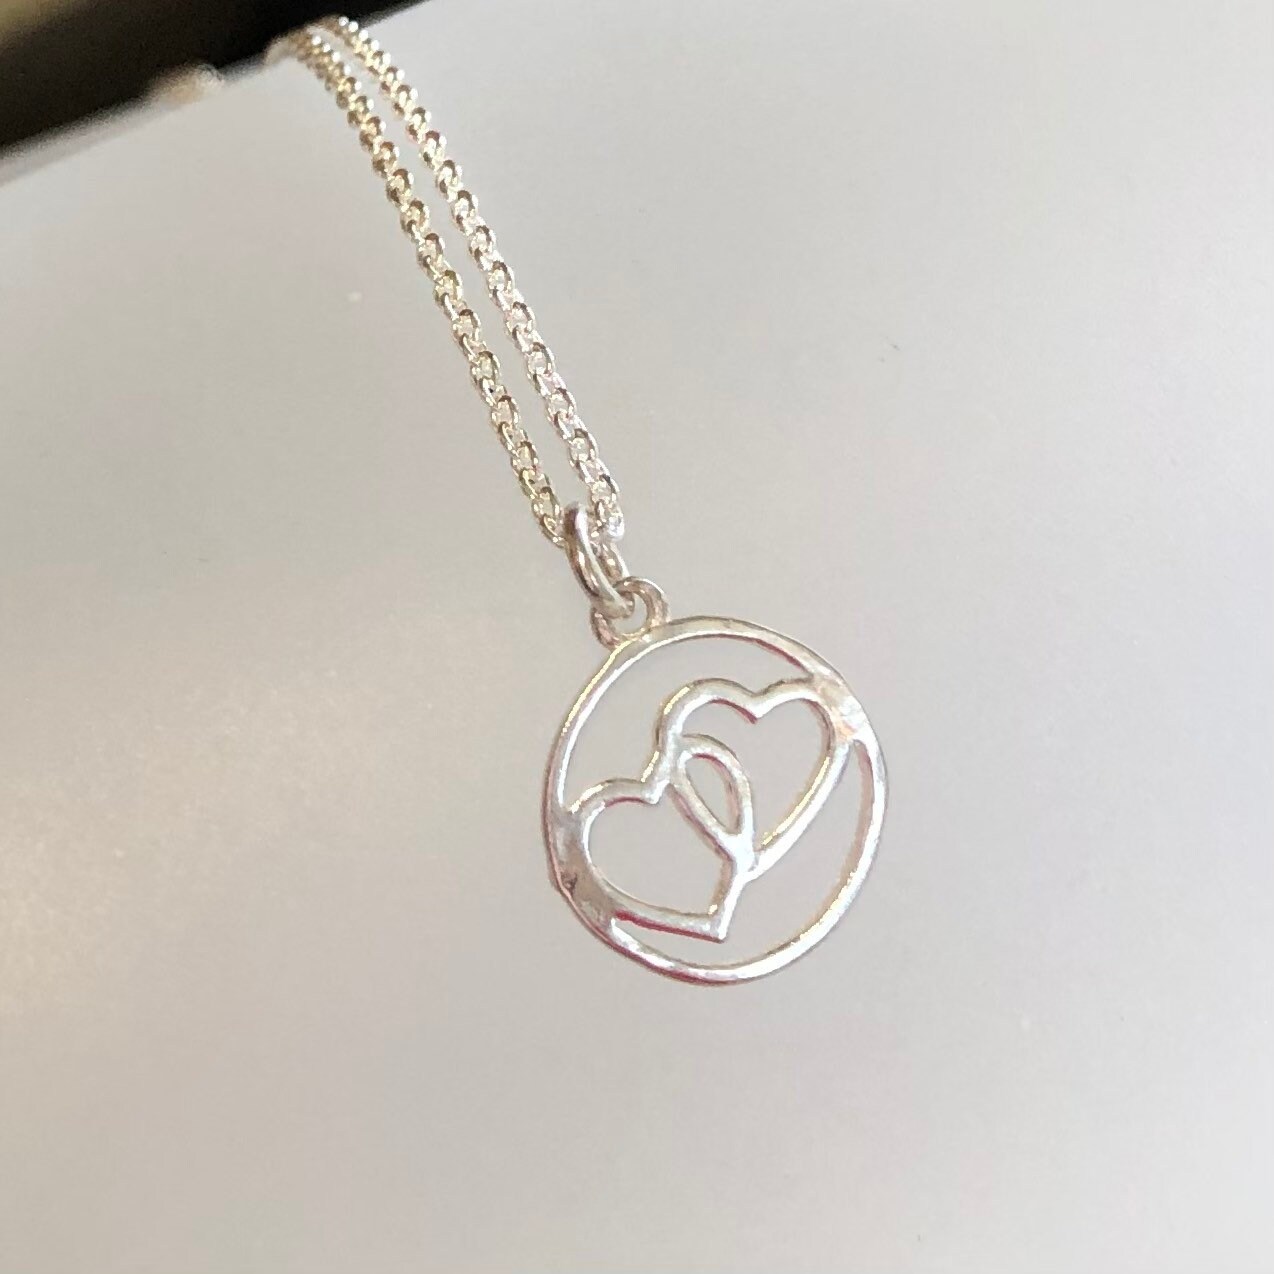 Twin Hearts Necklace, Double Heart Pendant, Two Hearts in Circle, Sterling Silver Heart Necklace, Circle Heart Mom Necklace, Couple Necklace